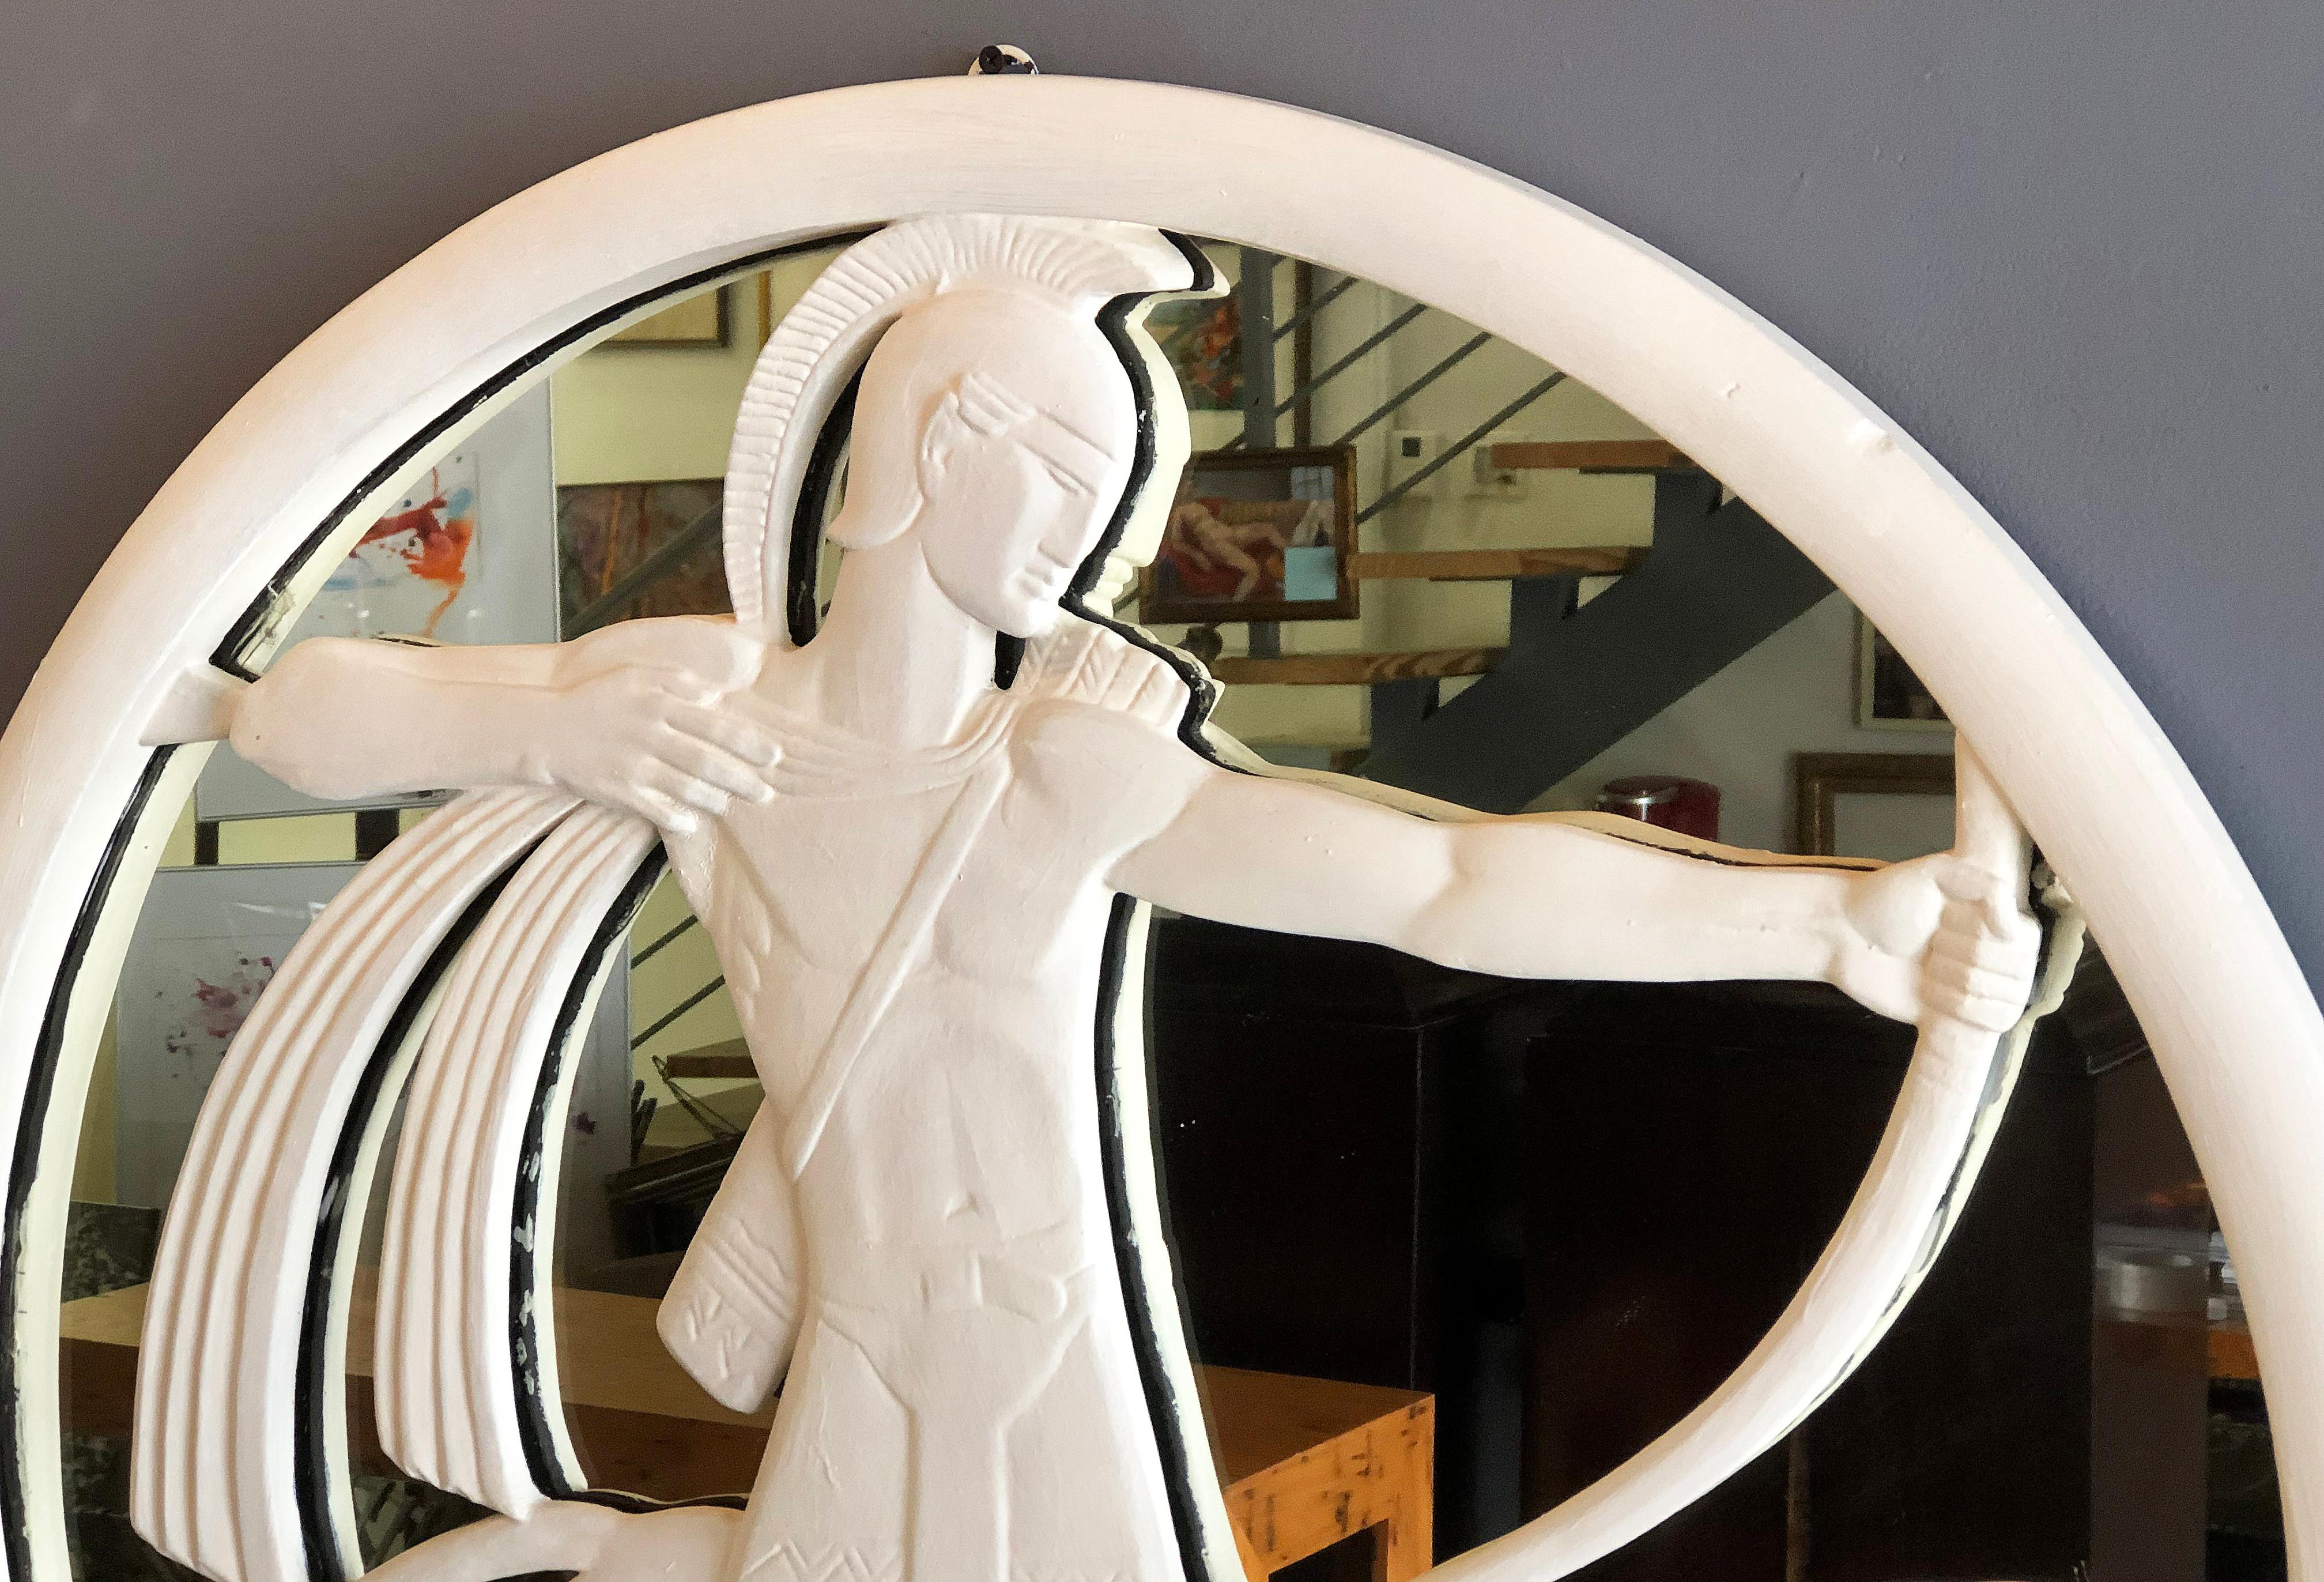 Period Art Deco plaster archer and dog mirror

Offered for sale is a 1940s Mid-Century Modern Art Deco plaster mirror with an iconic archer hunter and dog design. The circular mirror combines functionality with art. This period mirror is a great